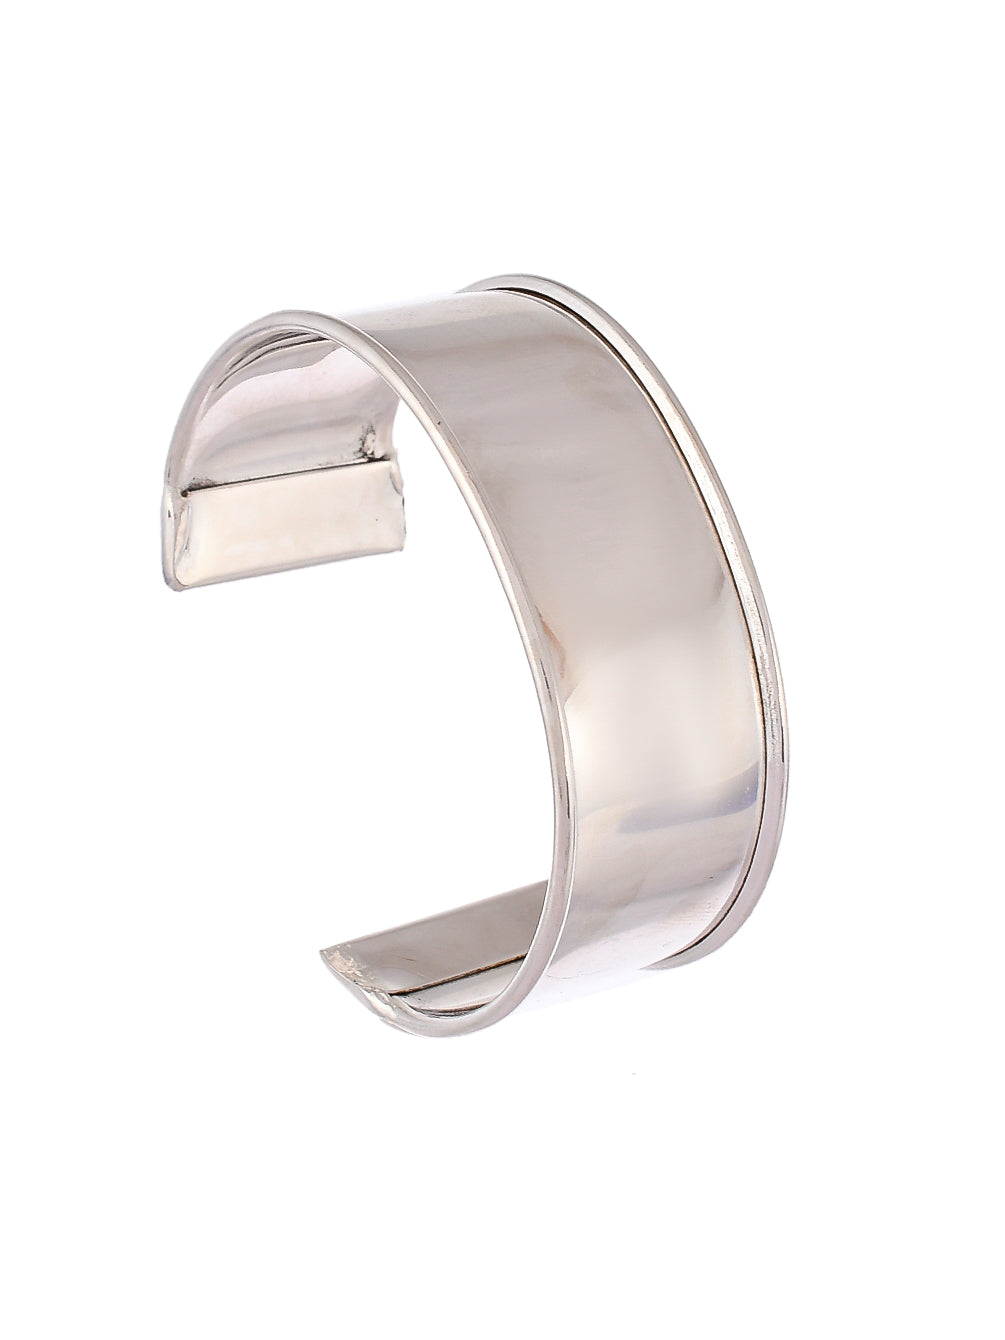 Silver plated Handcuff Bracelet